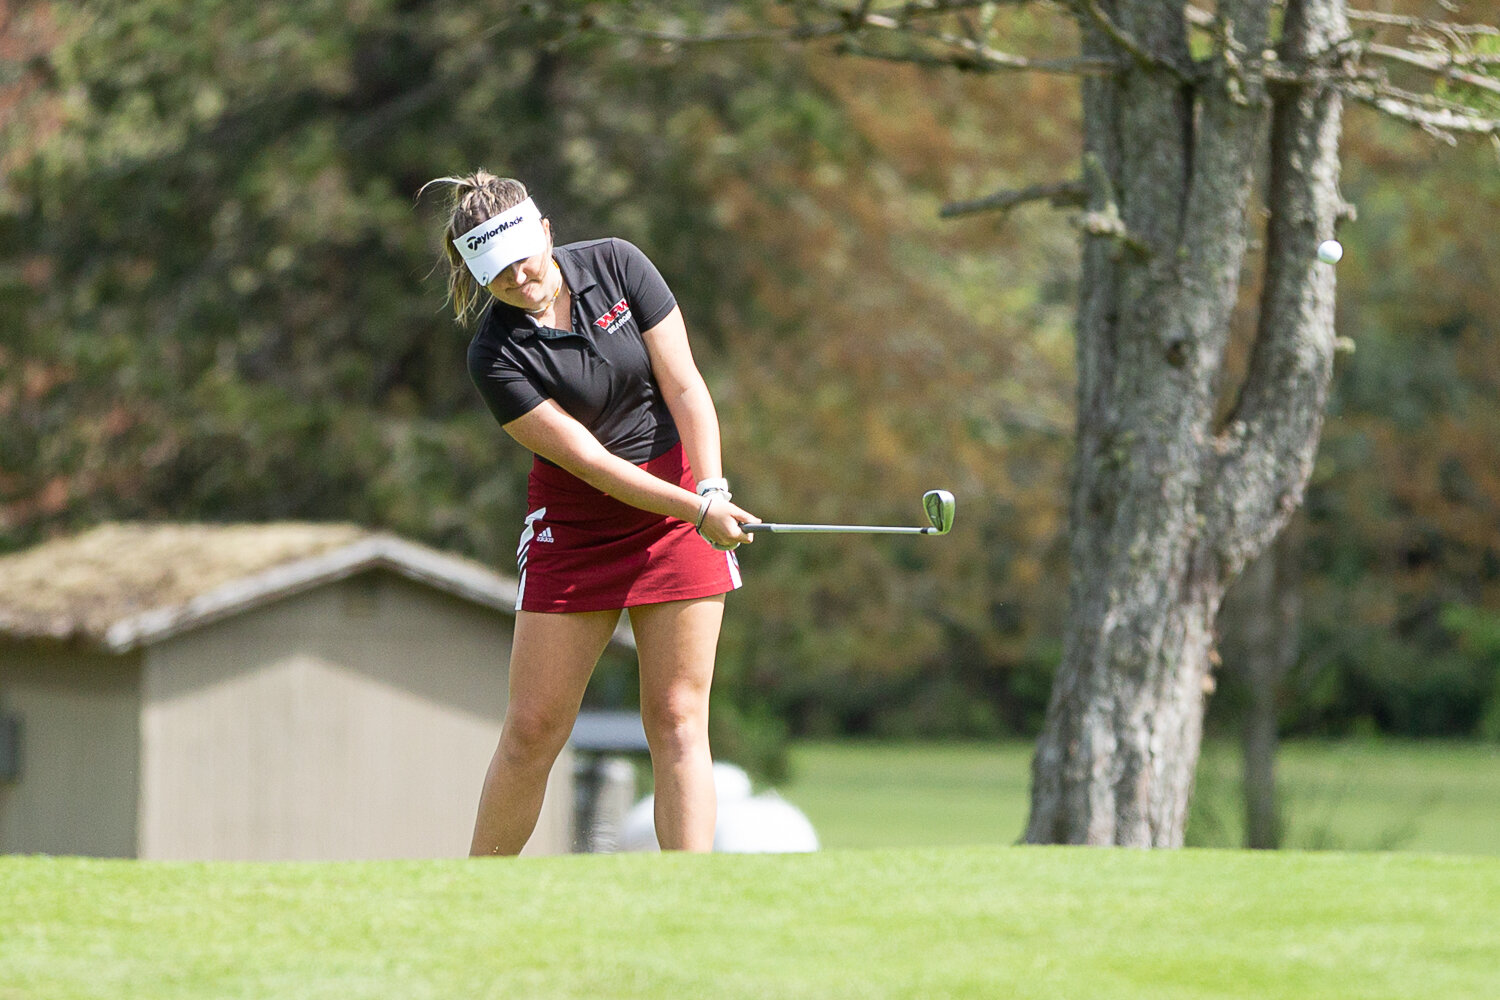 W.F. West's Natalie Eklund chips a shot toward the putting green on the first hole at Tumwater Valley in the 2A EvCo Championships May 9.